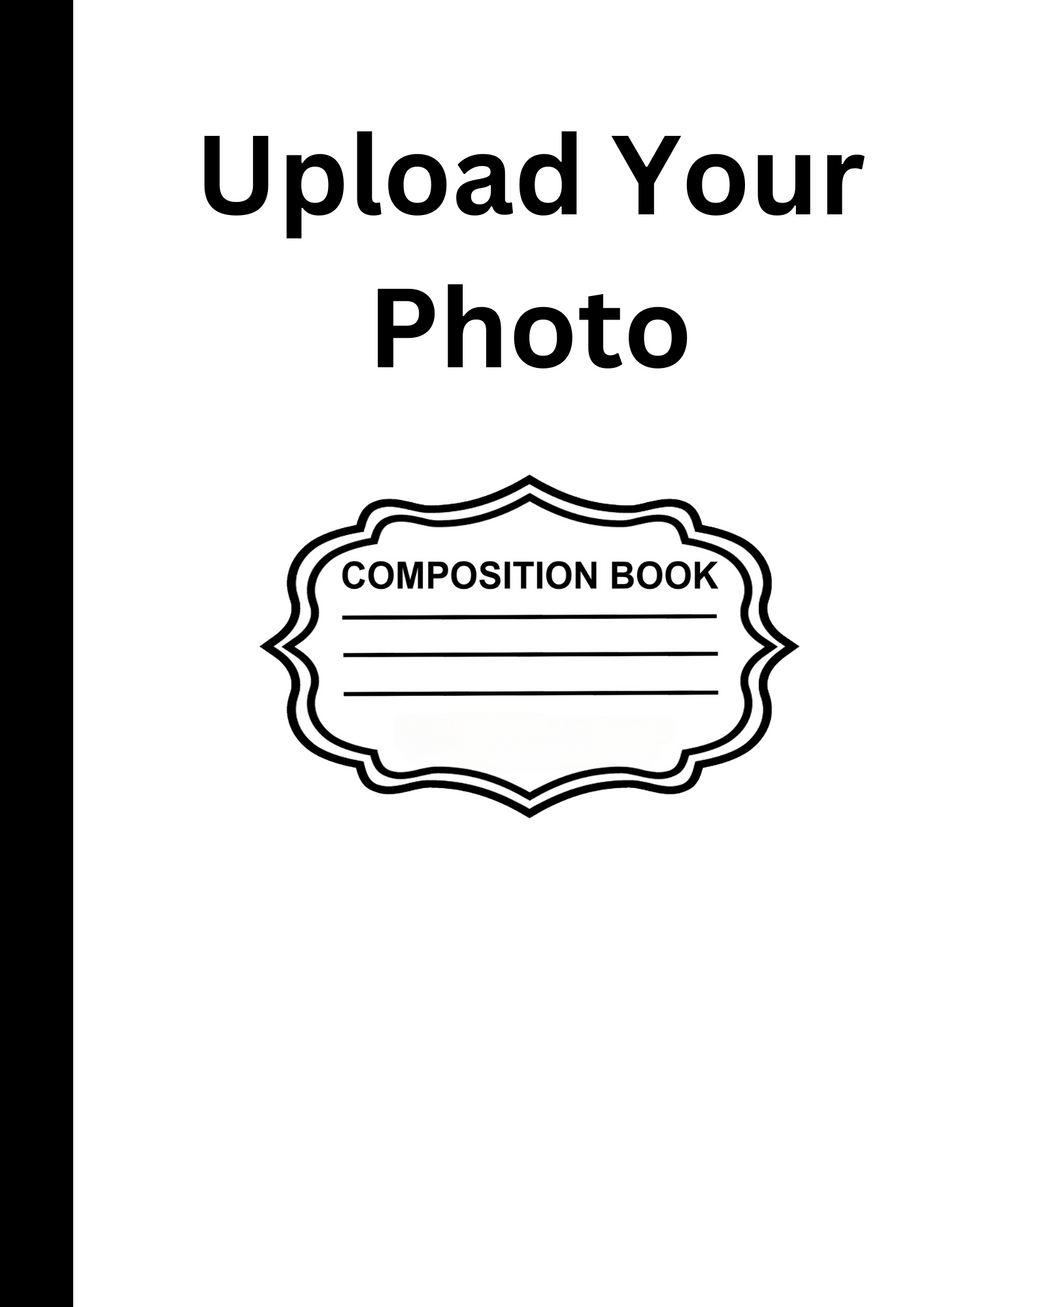 Custom Composition Notebook (Upload Your Photo)